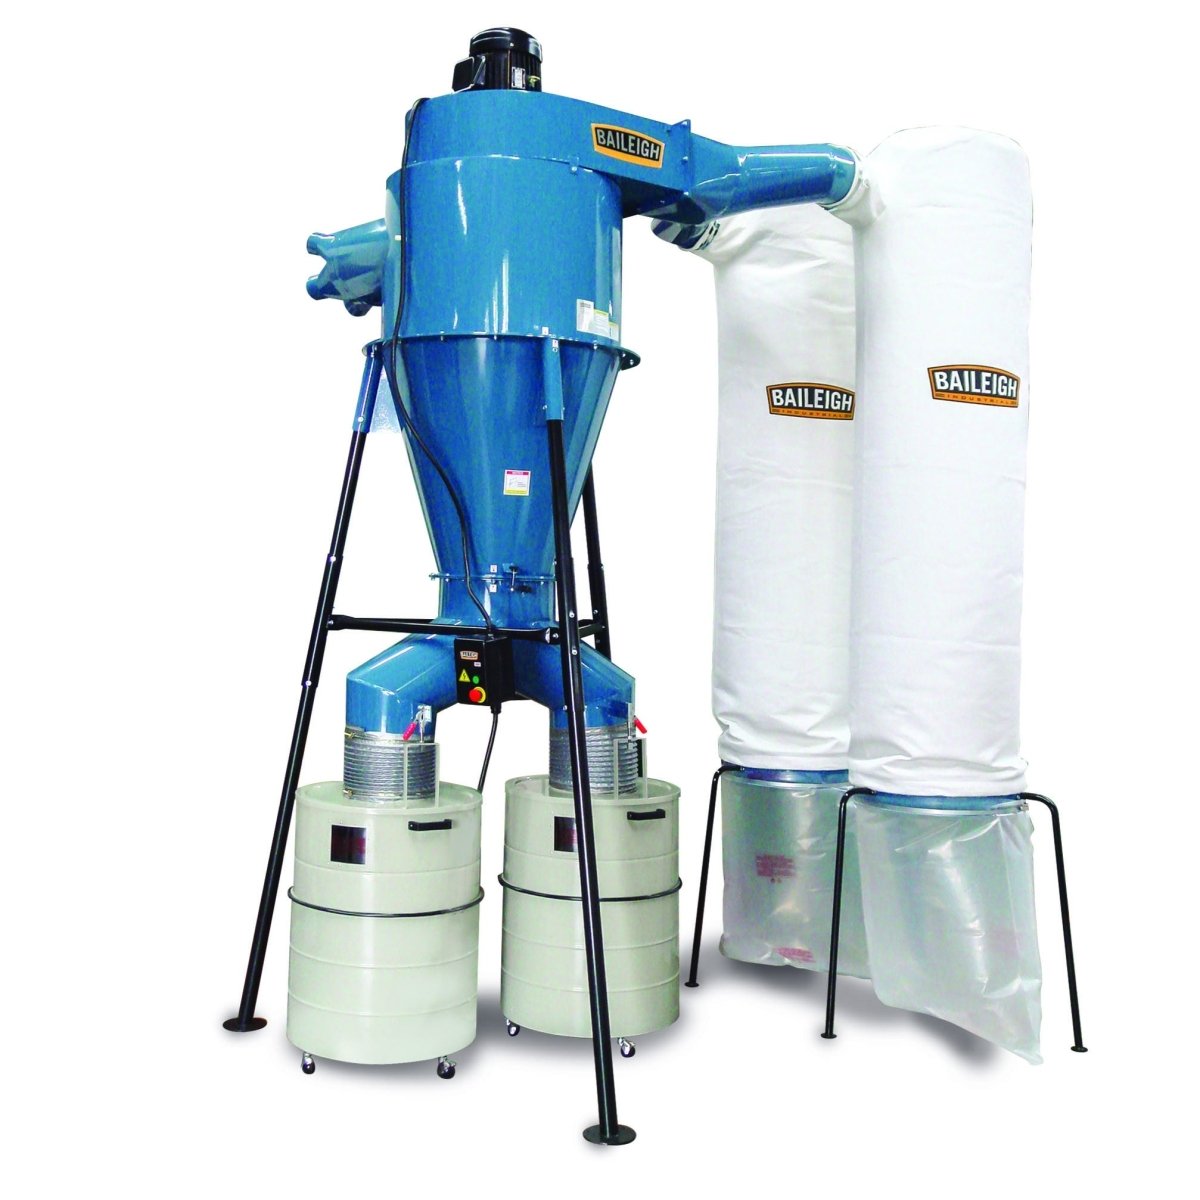 10HP Cyclone Dust Collector DC-6000C - Diamond Tool Store